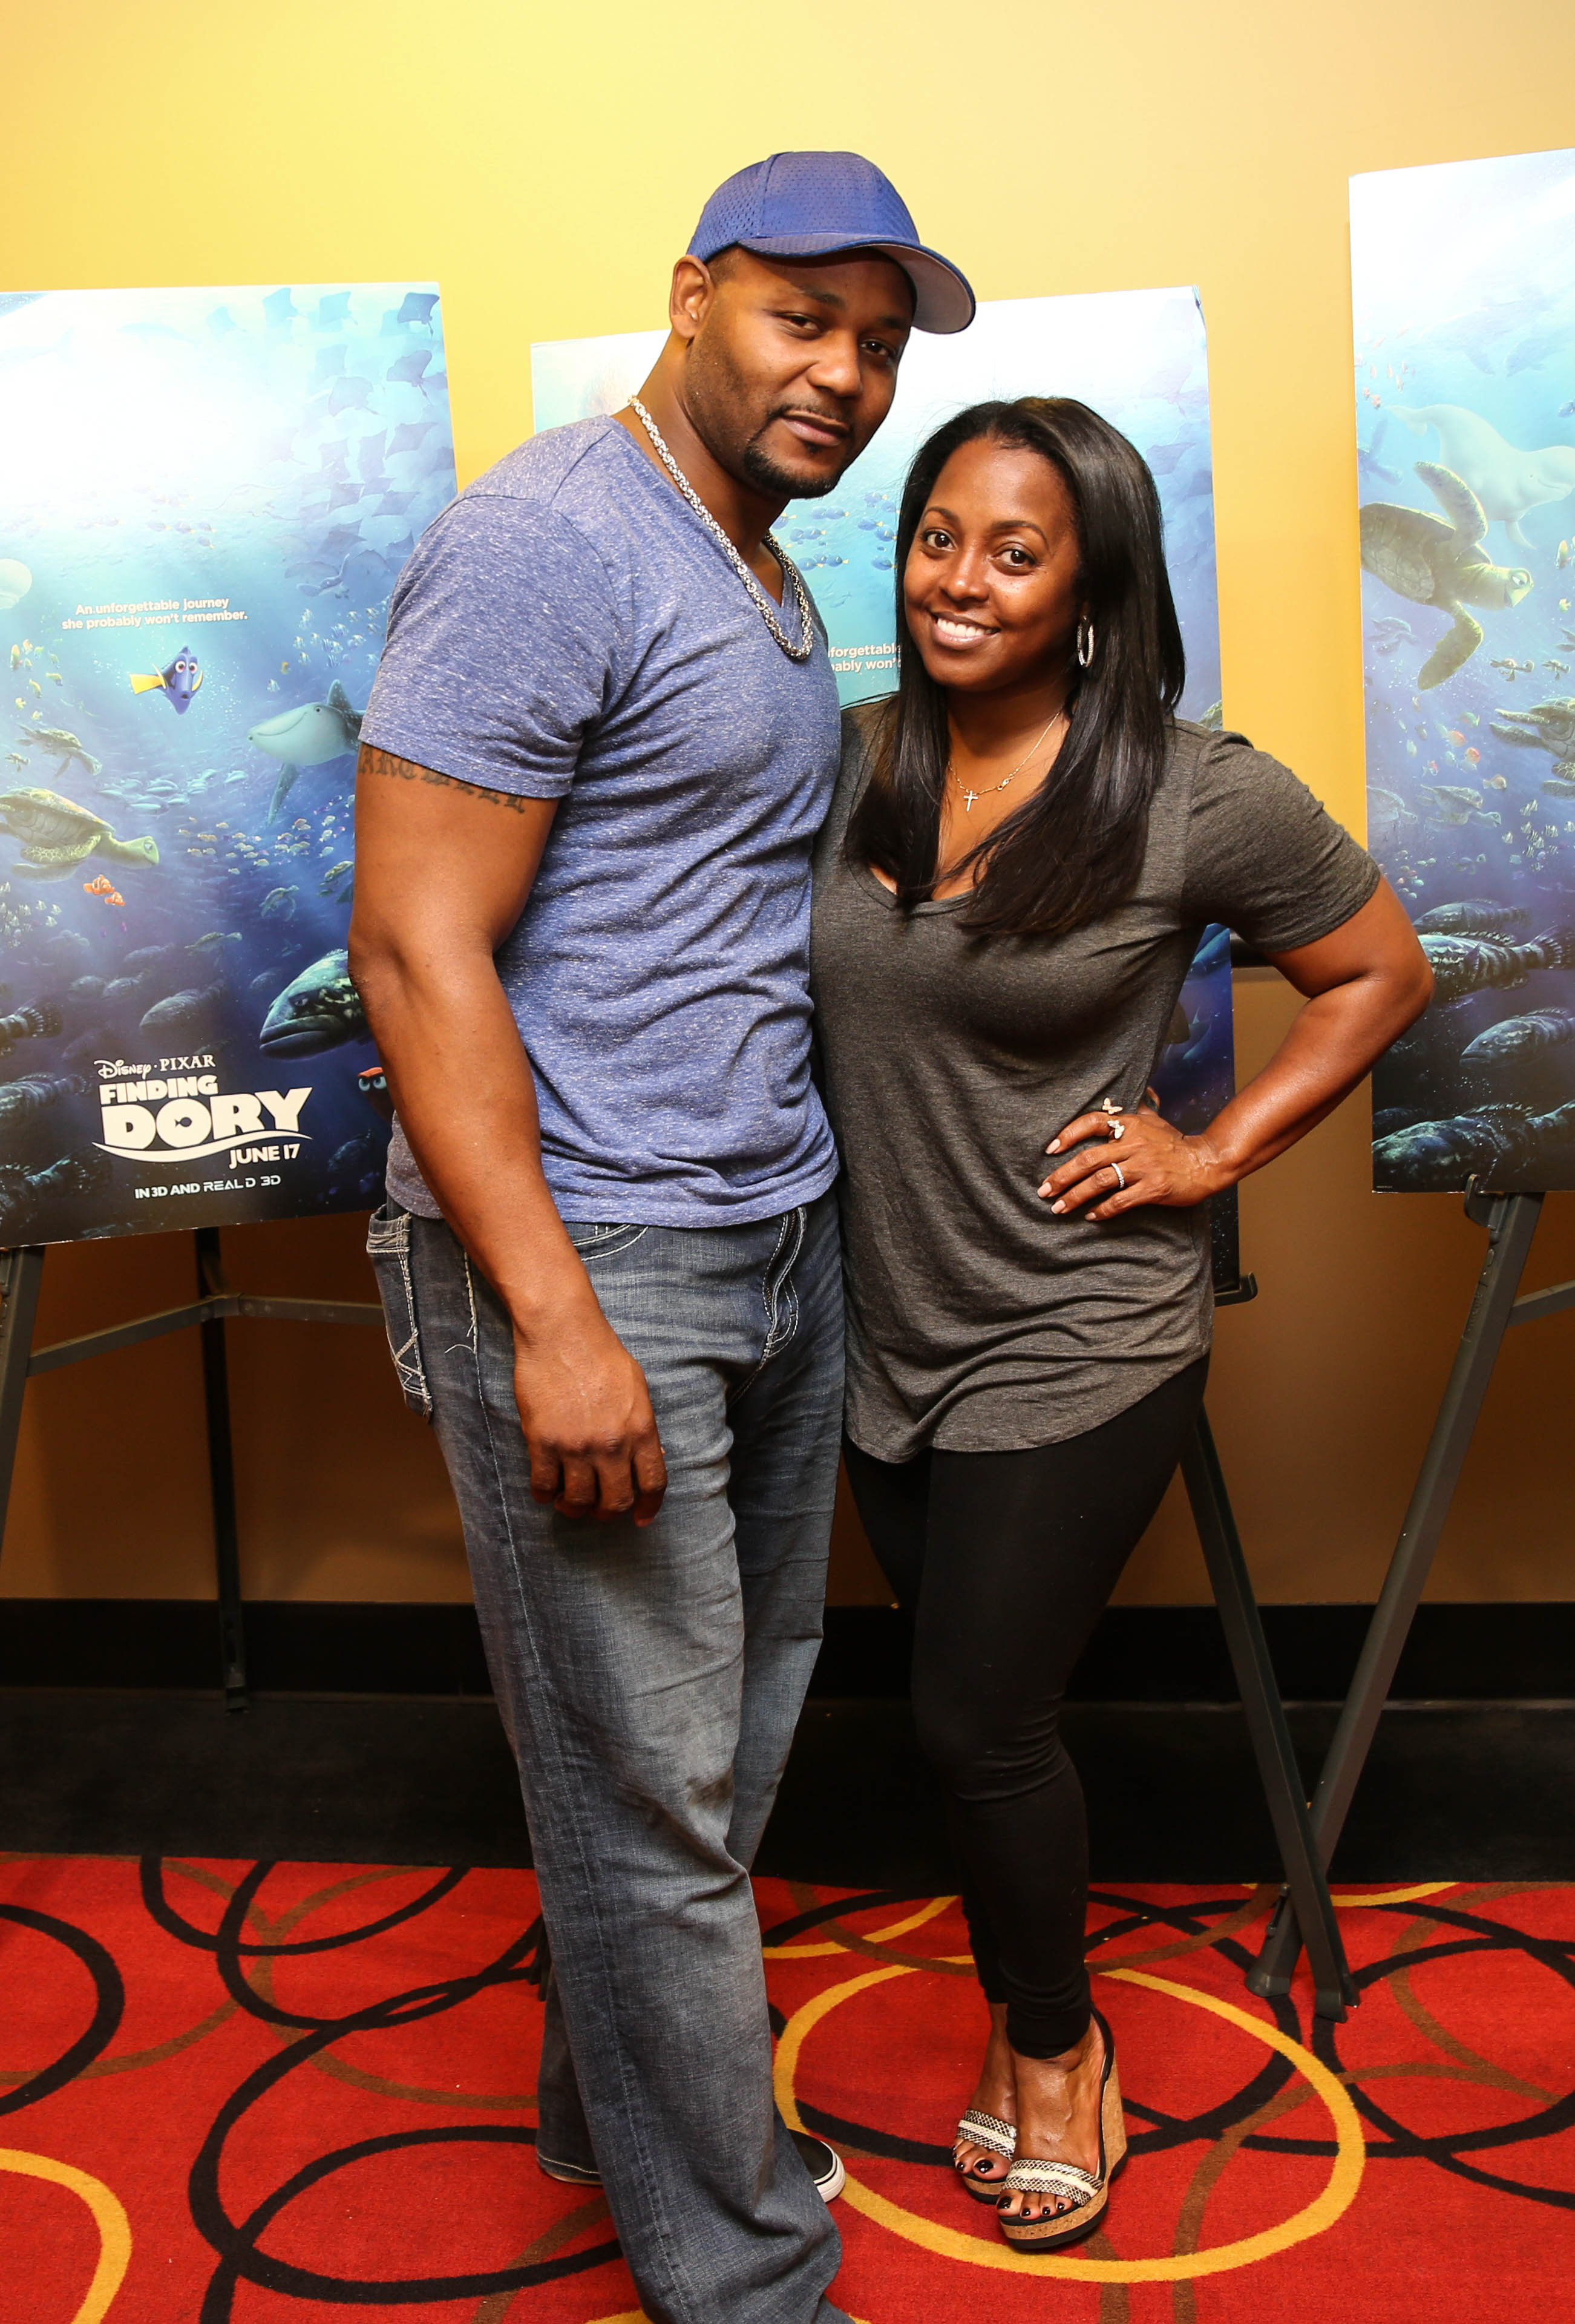 Ed Hartwell and Keshia Knight Pulliam at the advance screening of "Finding Dory" in Atlanta, 2016 | Source: Getty Images